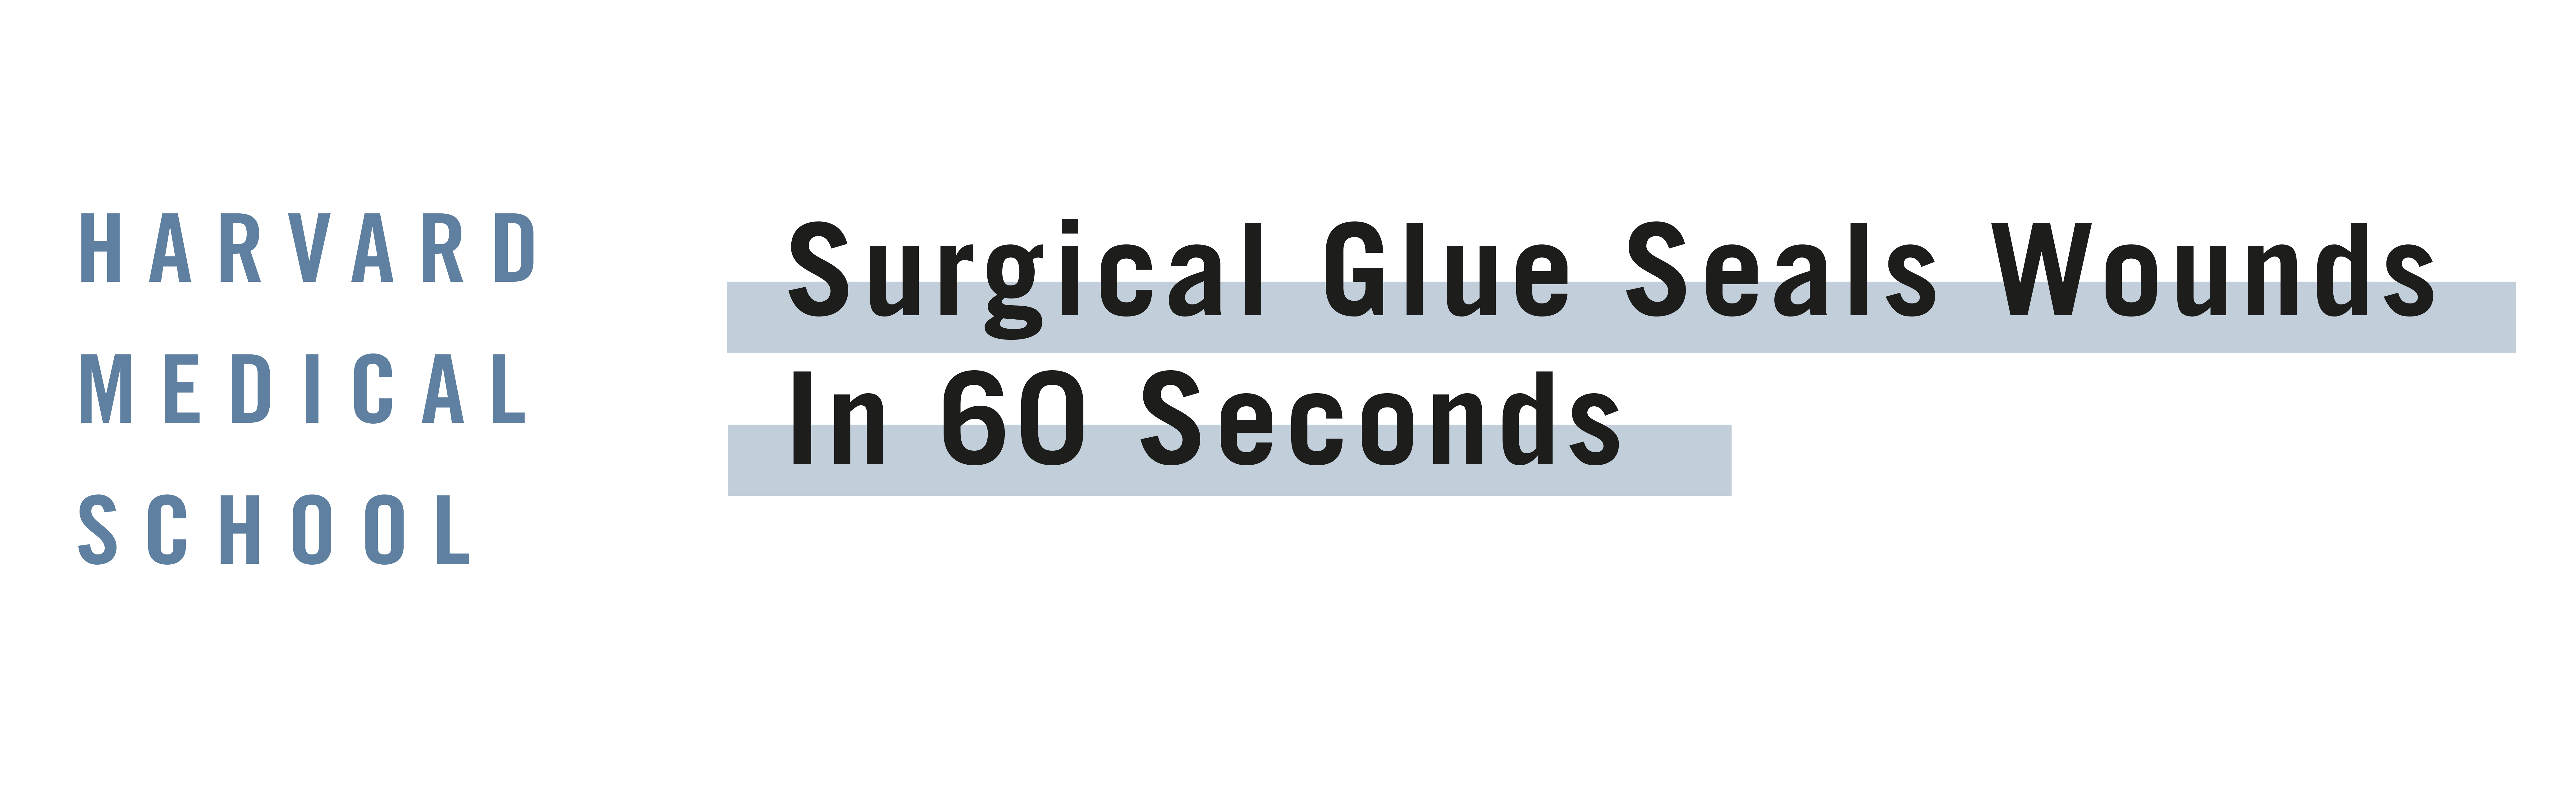 Surgical Glue Seals Wounds in 60 Seconds